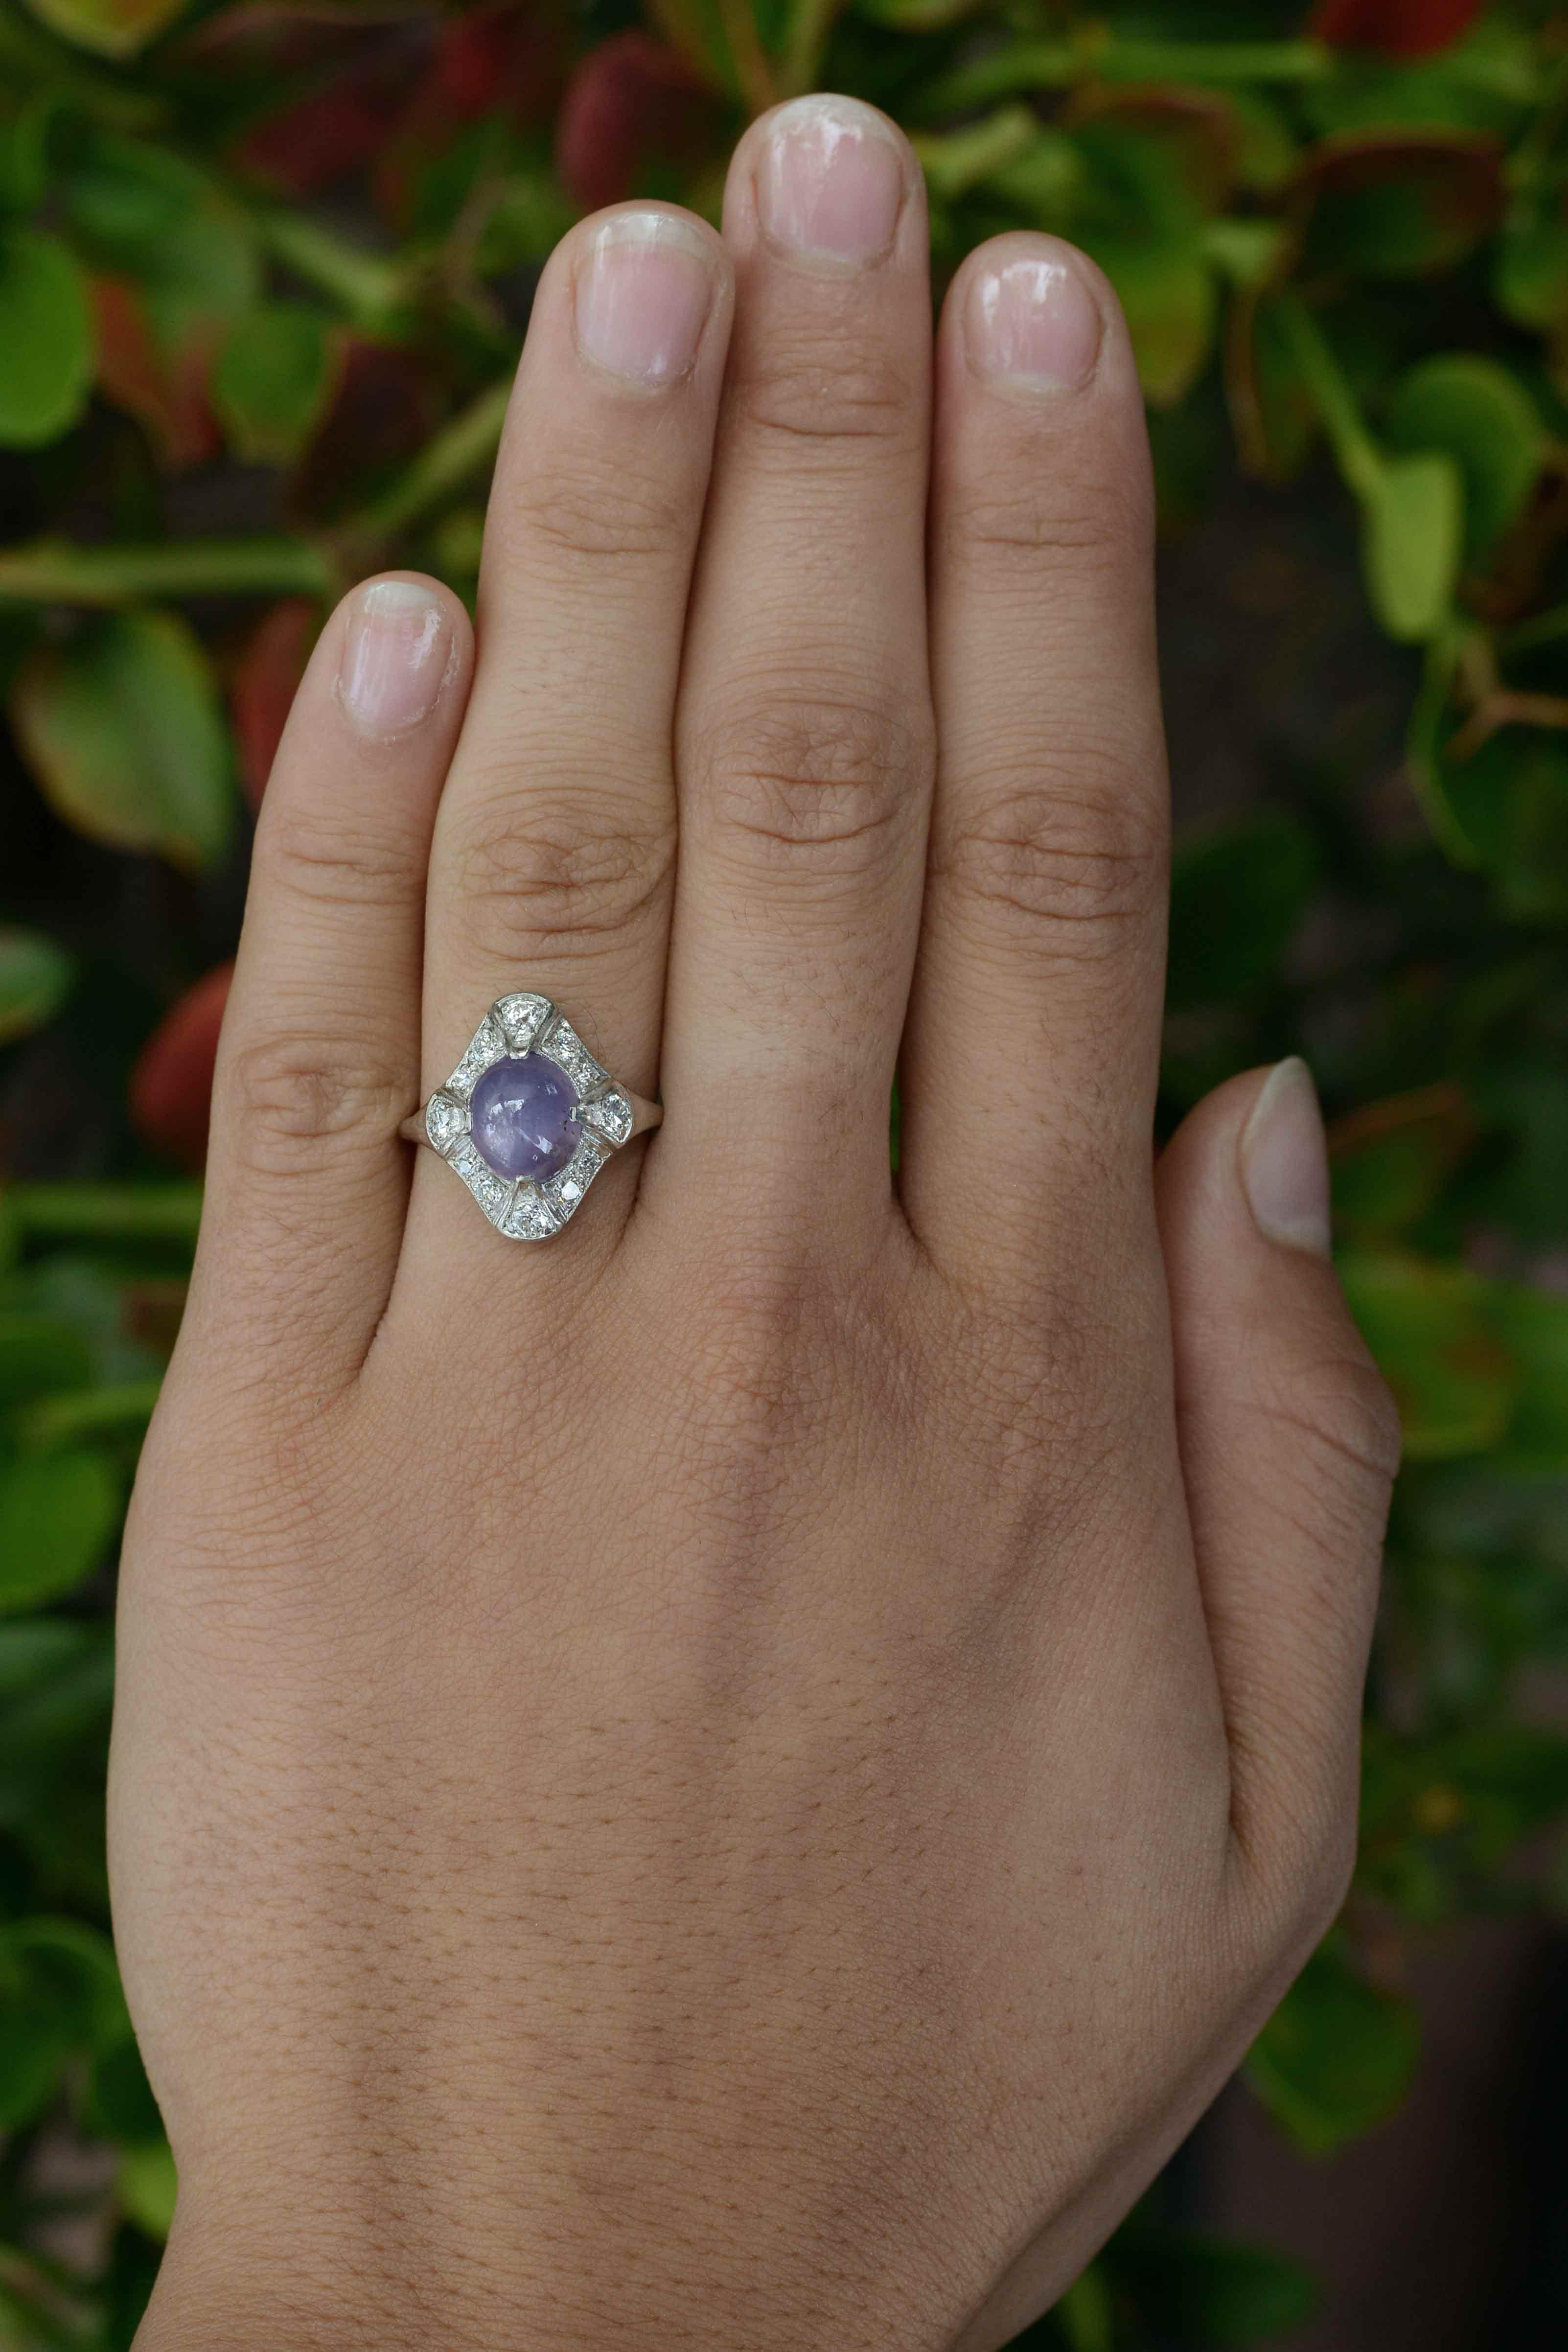 An Art Deco star sapphire cocktail ring that oozes elegance. This rare, natural, unheated 5 carat purple star sapphire displays a shimmering brilliance with a prominent star pattern and a captivating lavender color. Crafted as a dome ring, the